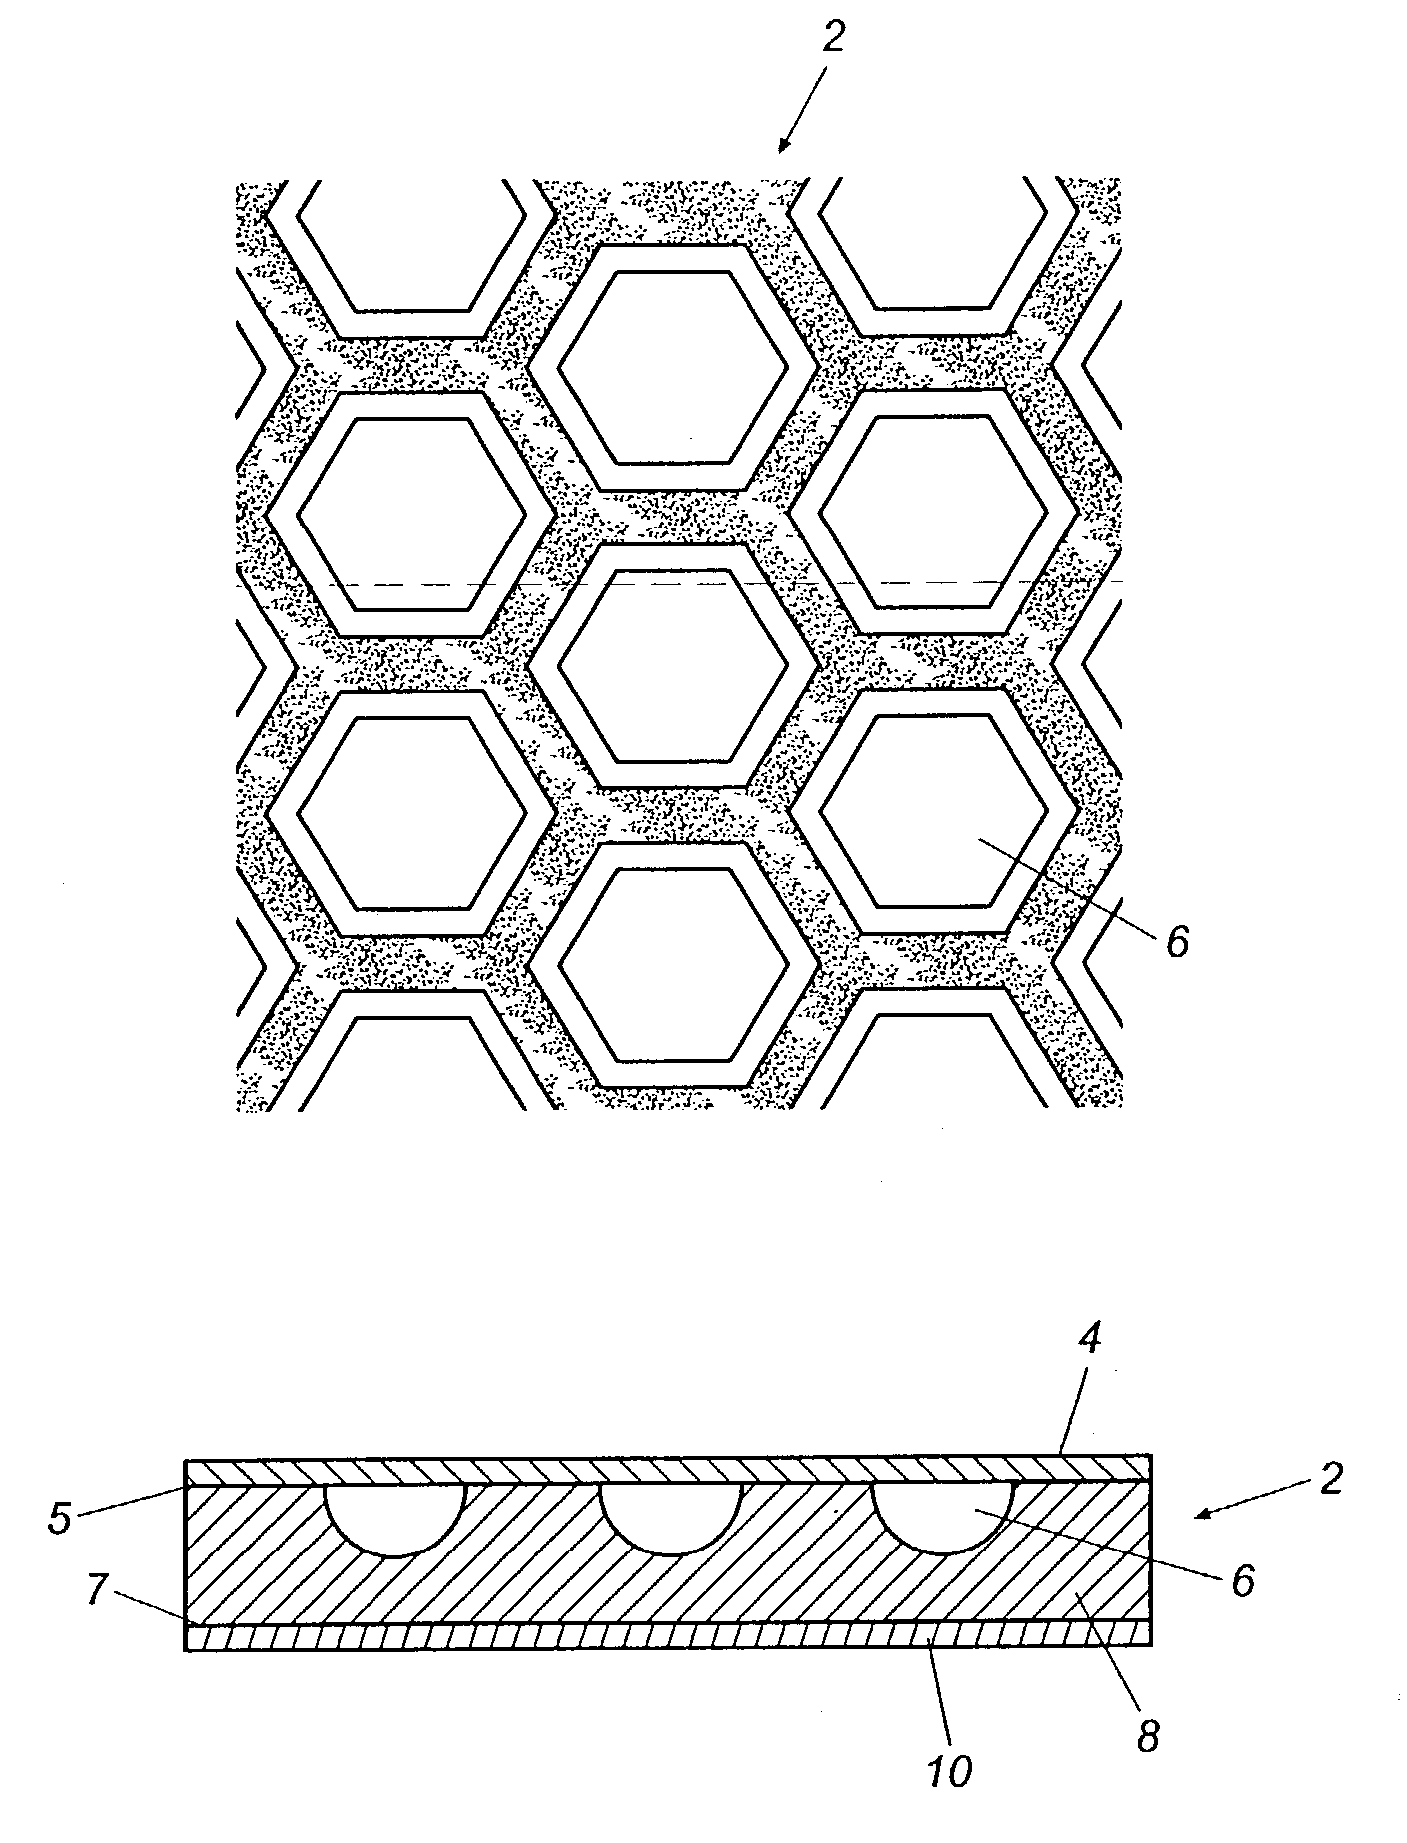 Acoustical panel having a honeycomb structure and method of making the same